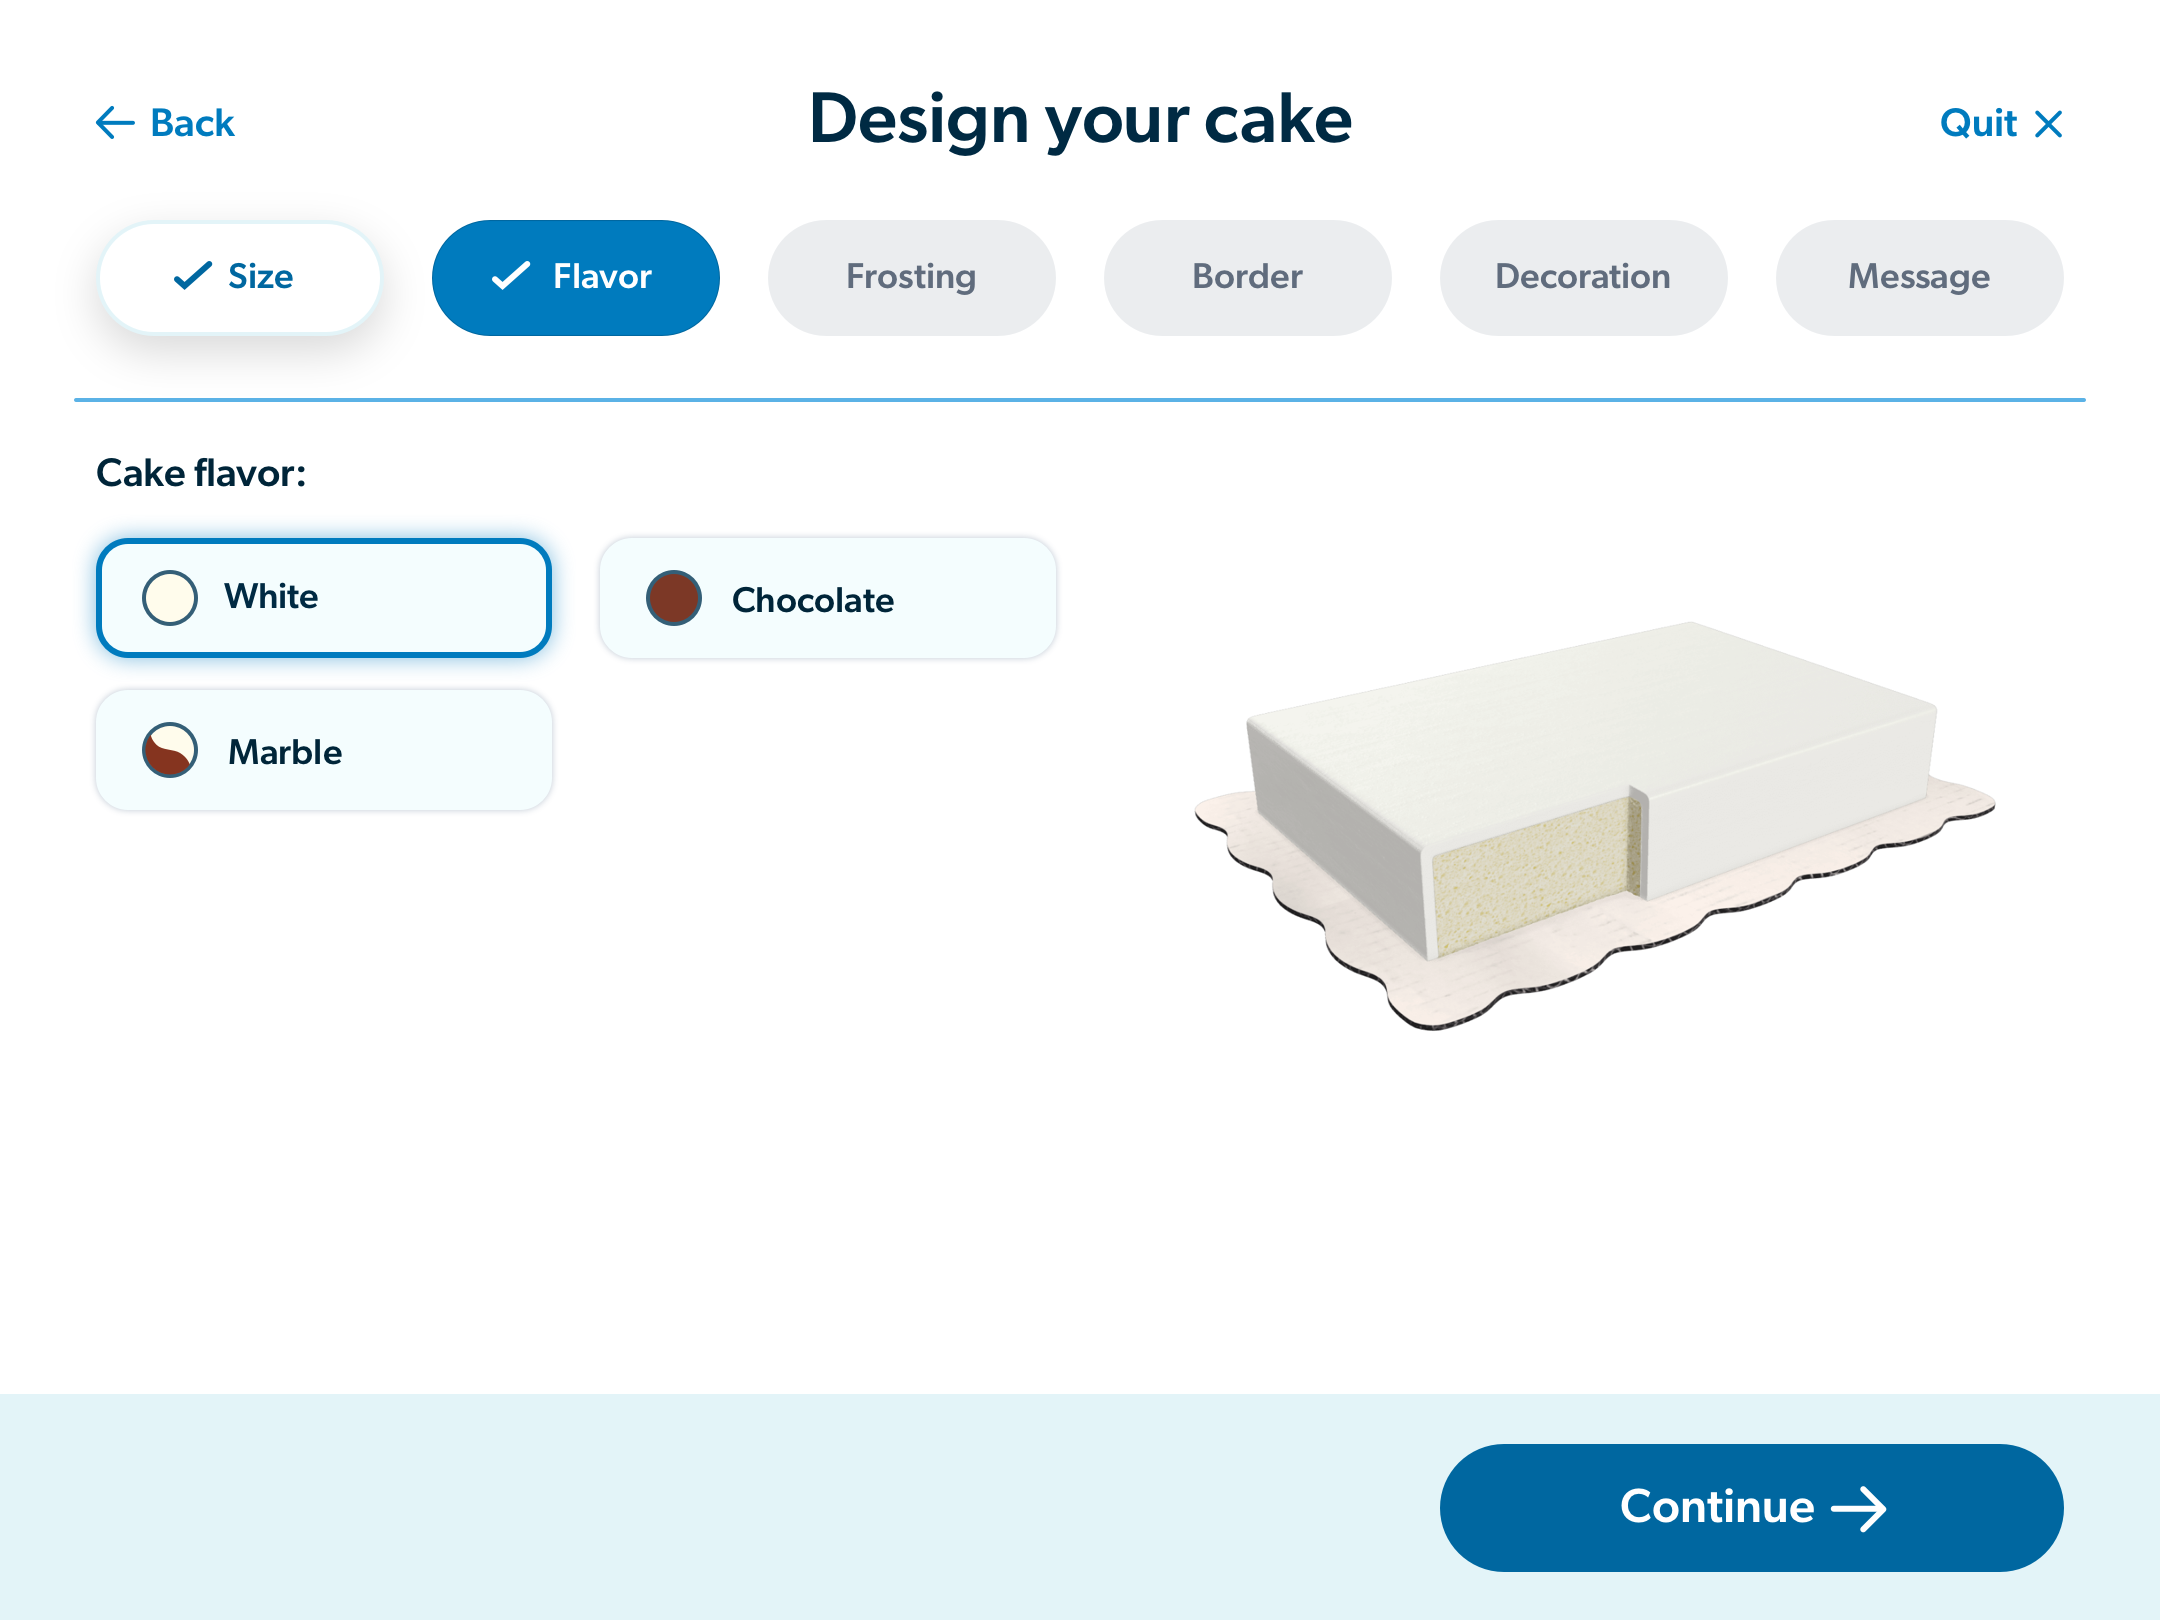 Select a cake flavor: white, chocolate, marble.